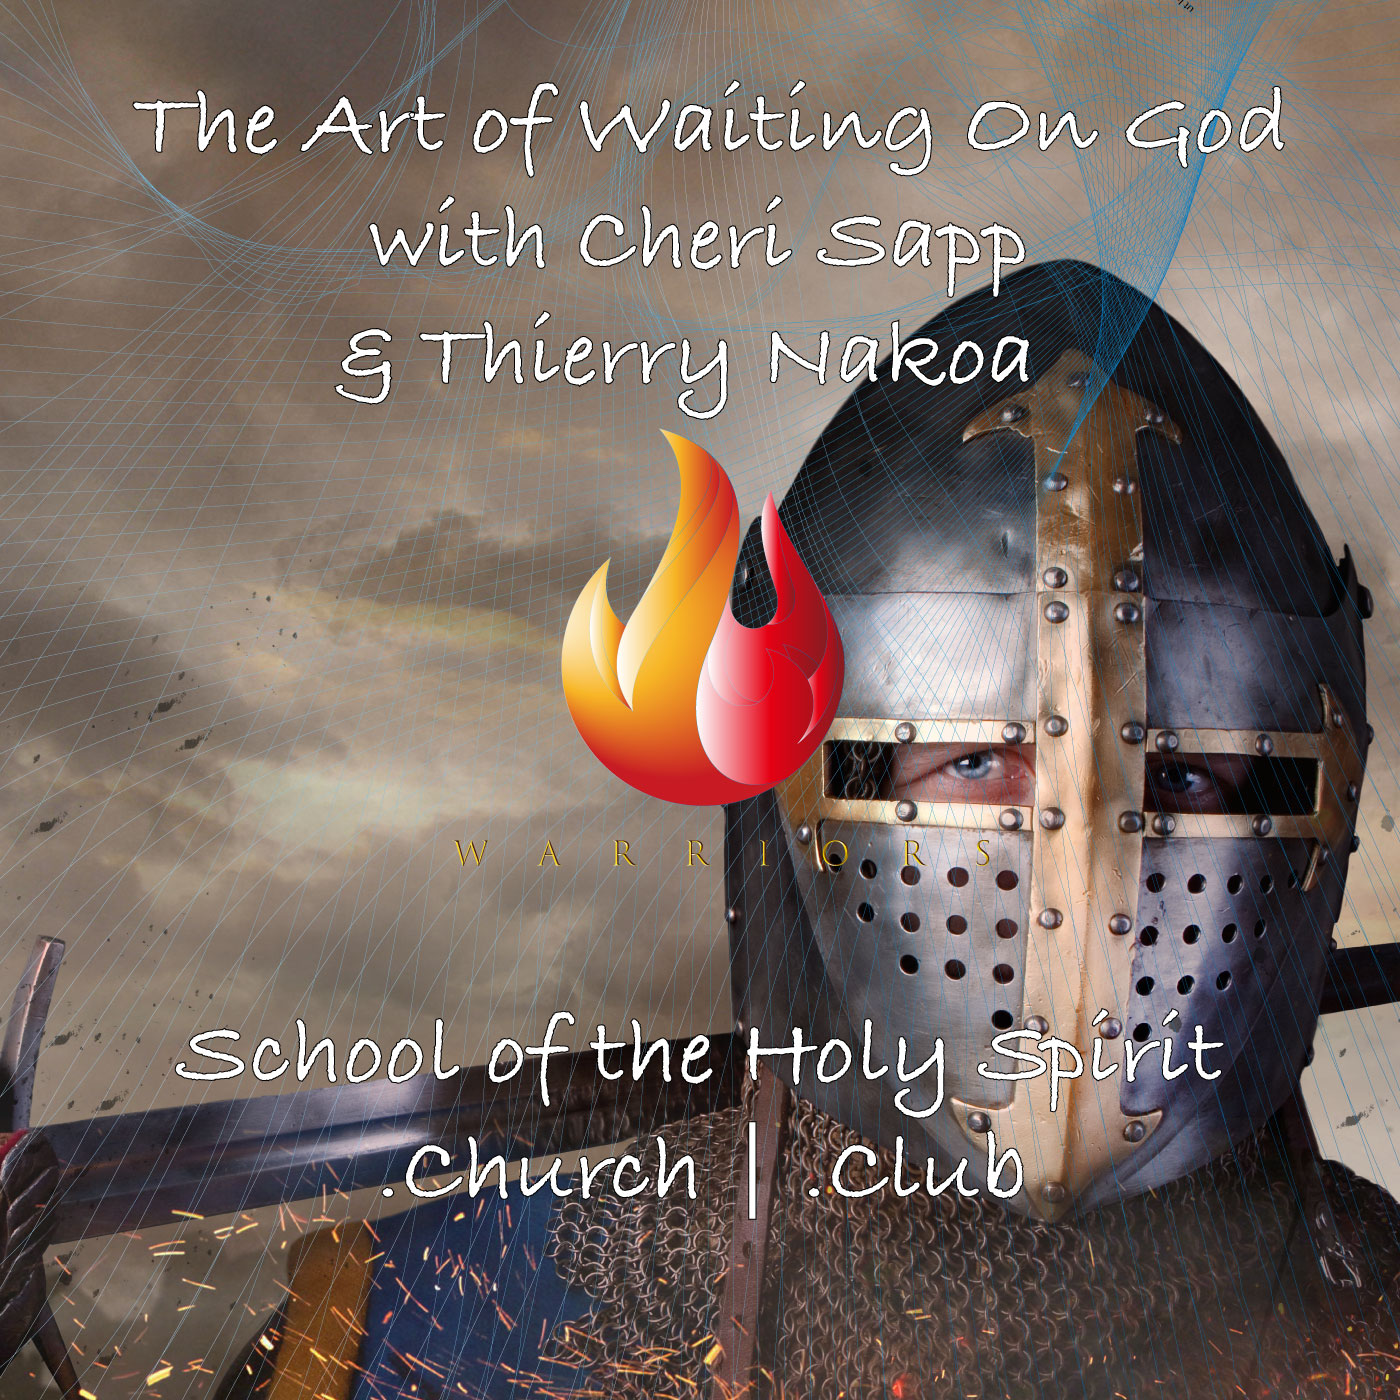 The Art of Waiting on God part 2 with Cheri Sapp and Thierry Nakoa